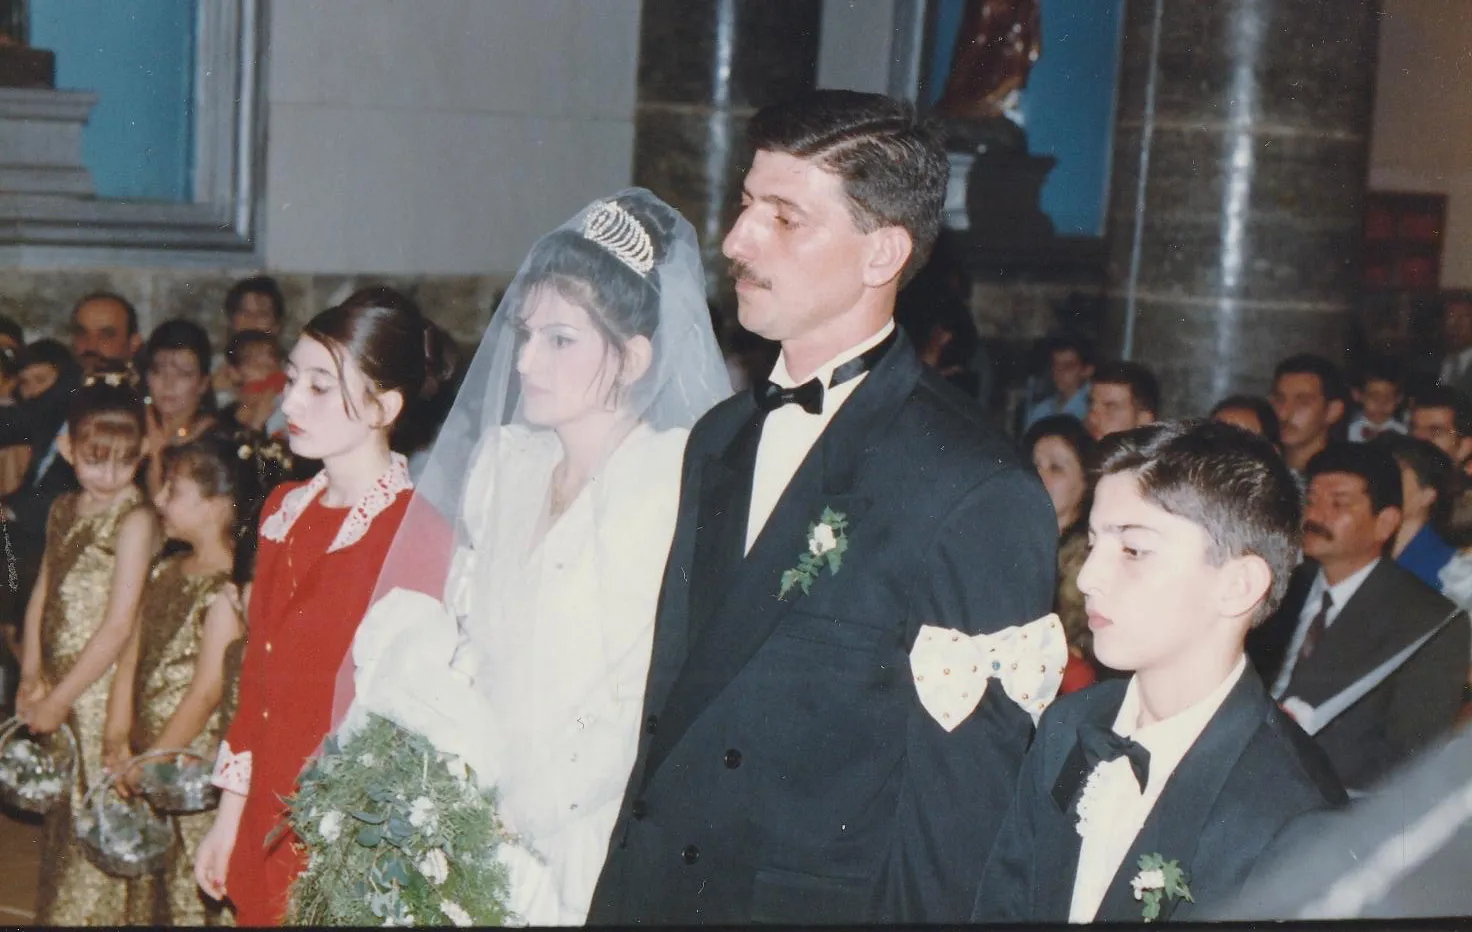 Georgena Habbaba on her wedding day in Our Lady of Perpetual Help Chaldean Catholic Church in Mosul, Iraq, on Oct. 14, 1998. Habbaba, who now lives in the United States, said her eyes filled with tears when she recently saw photos of her home parish and school rebuilt and consecrated. Credit: Photo courtesy of Georgena Habbaba